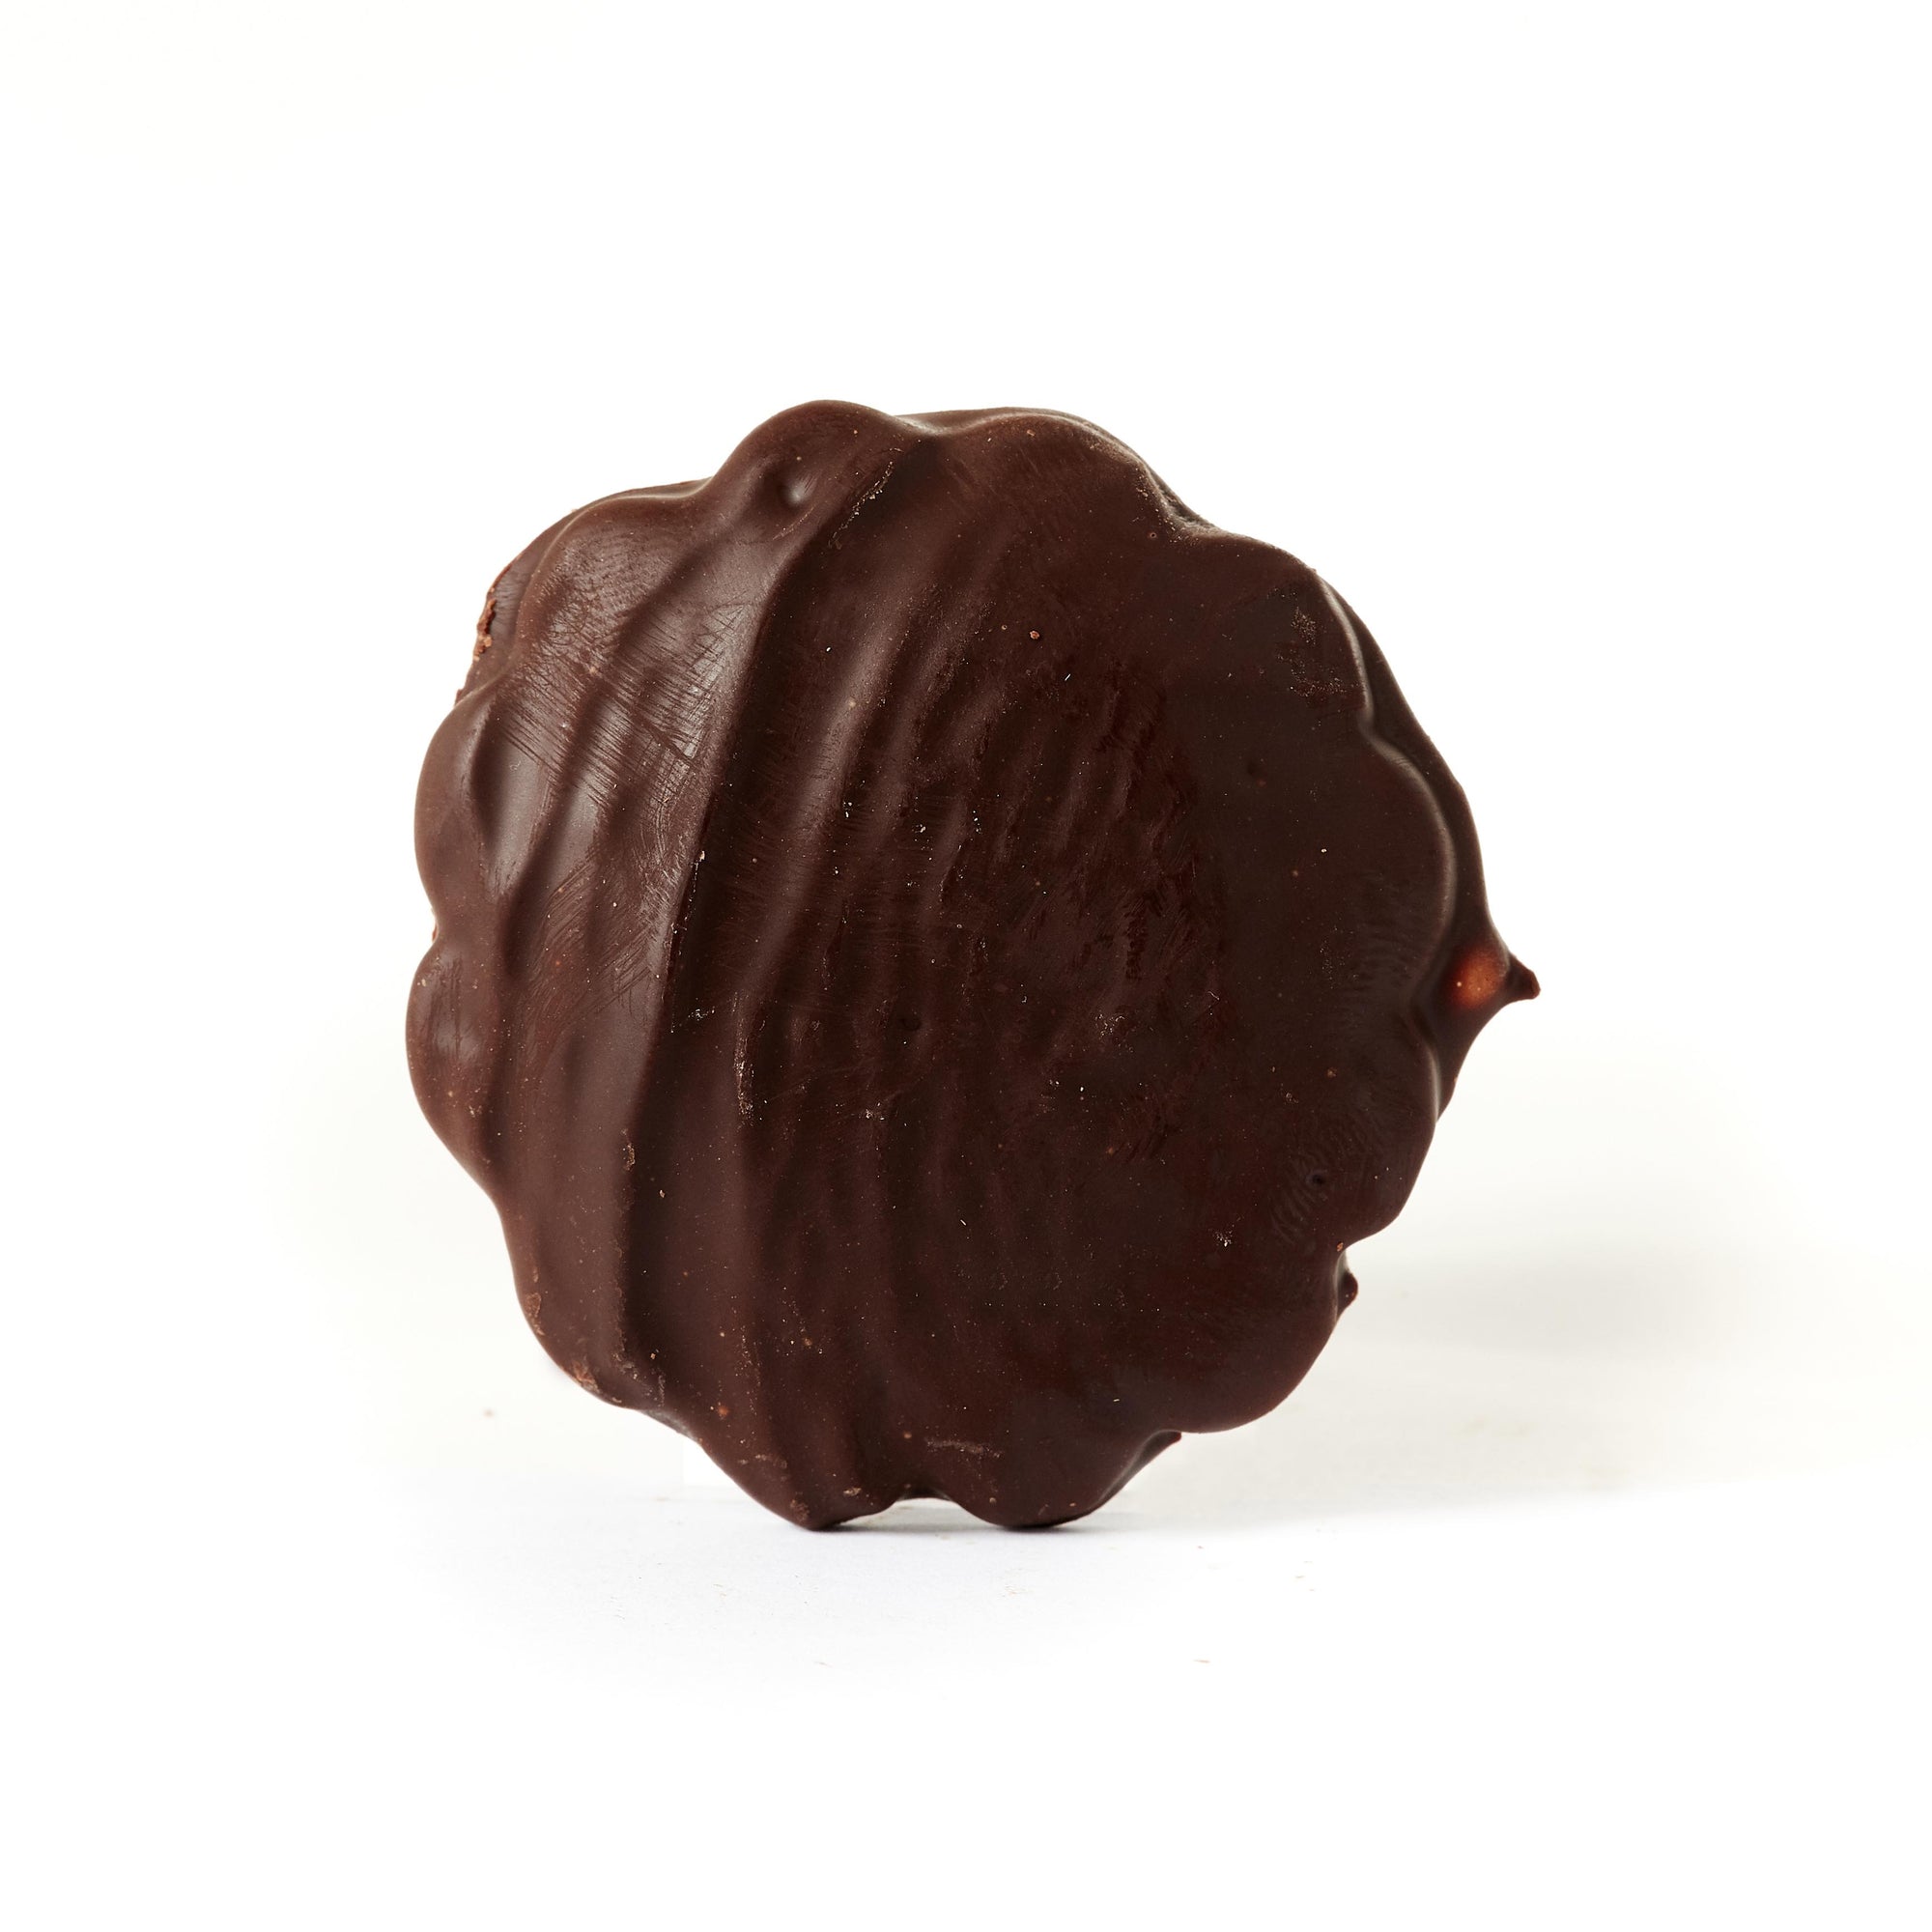  Top View of a Gluten-Free Chai Chocolate Tea Cookie